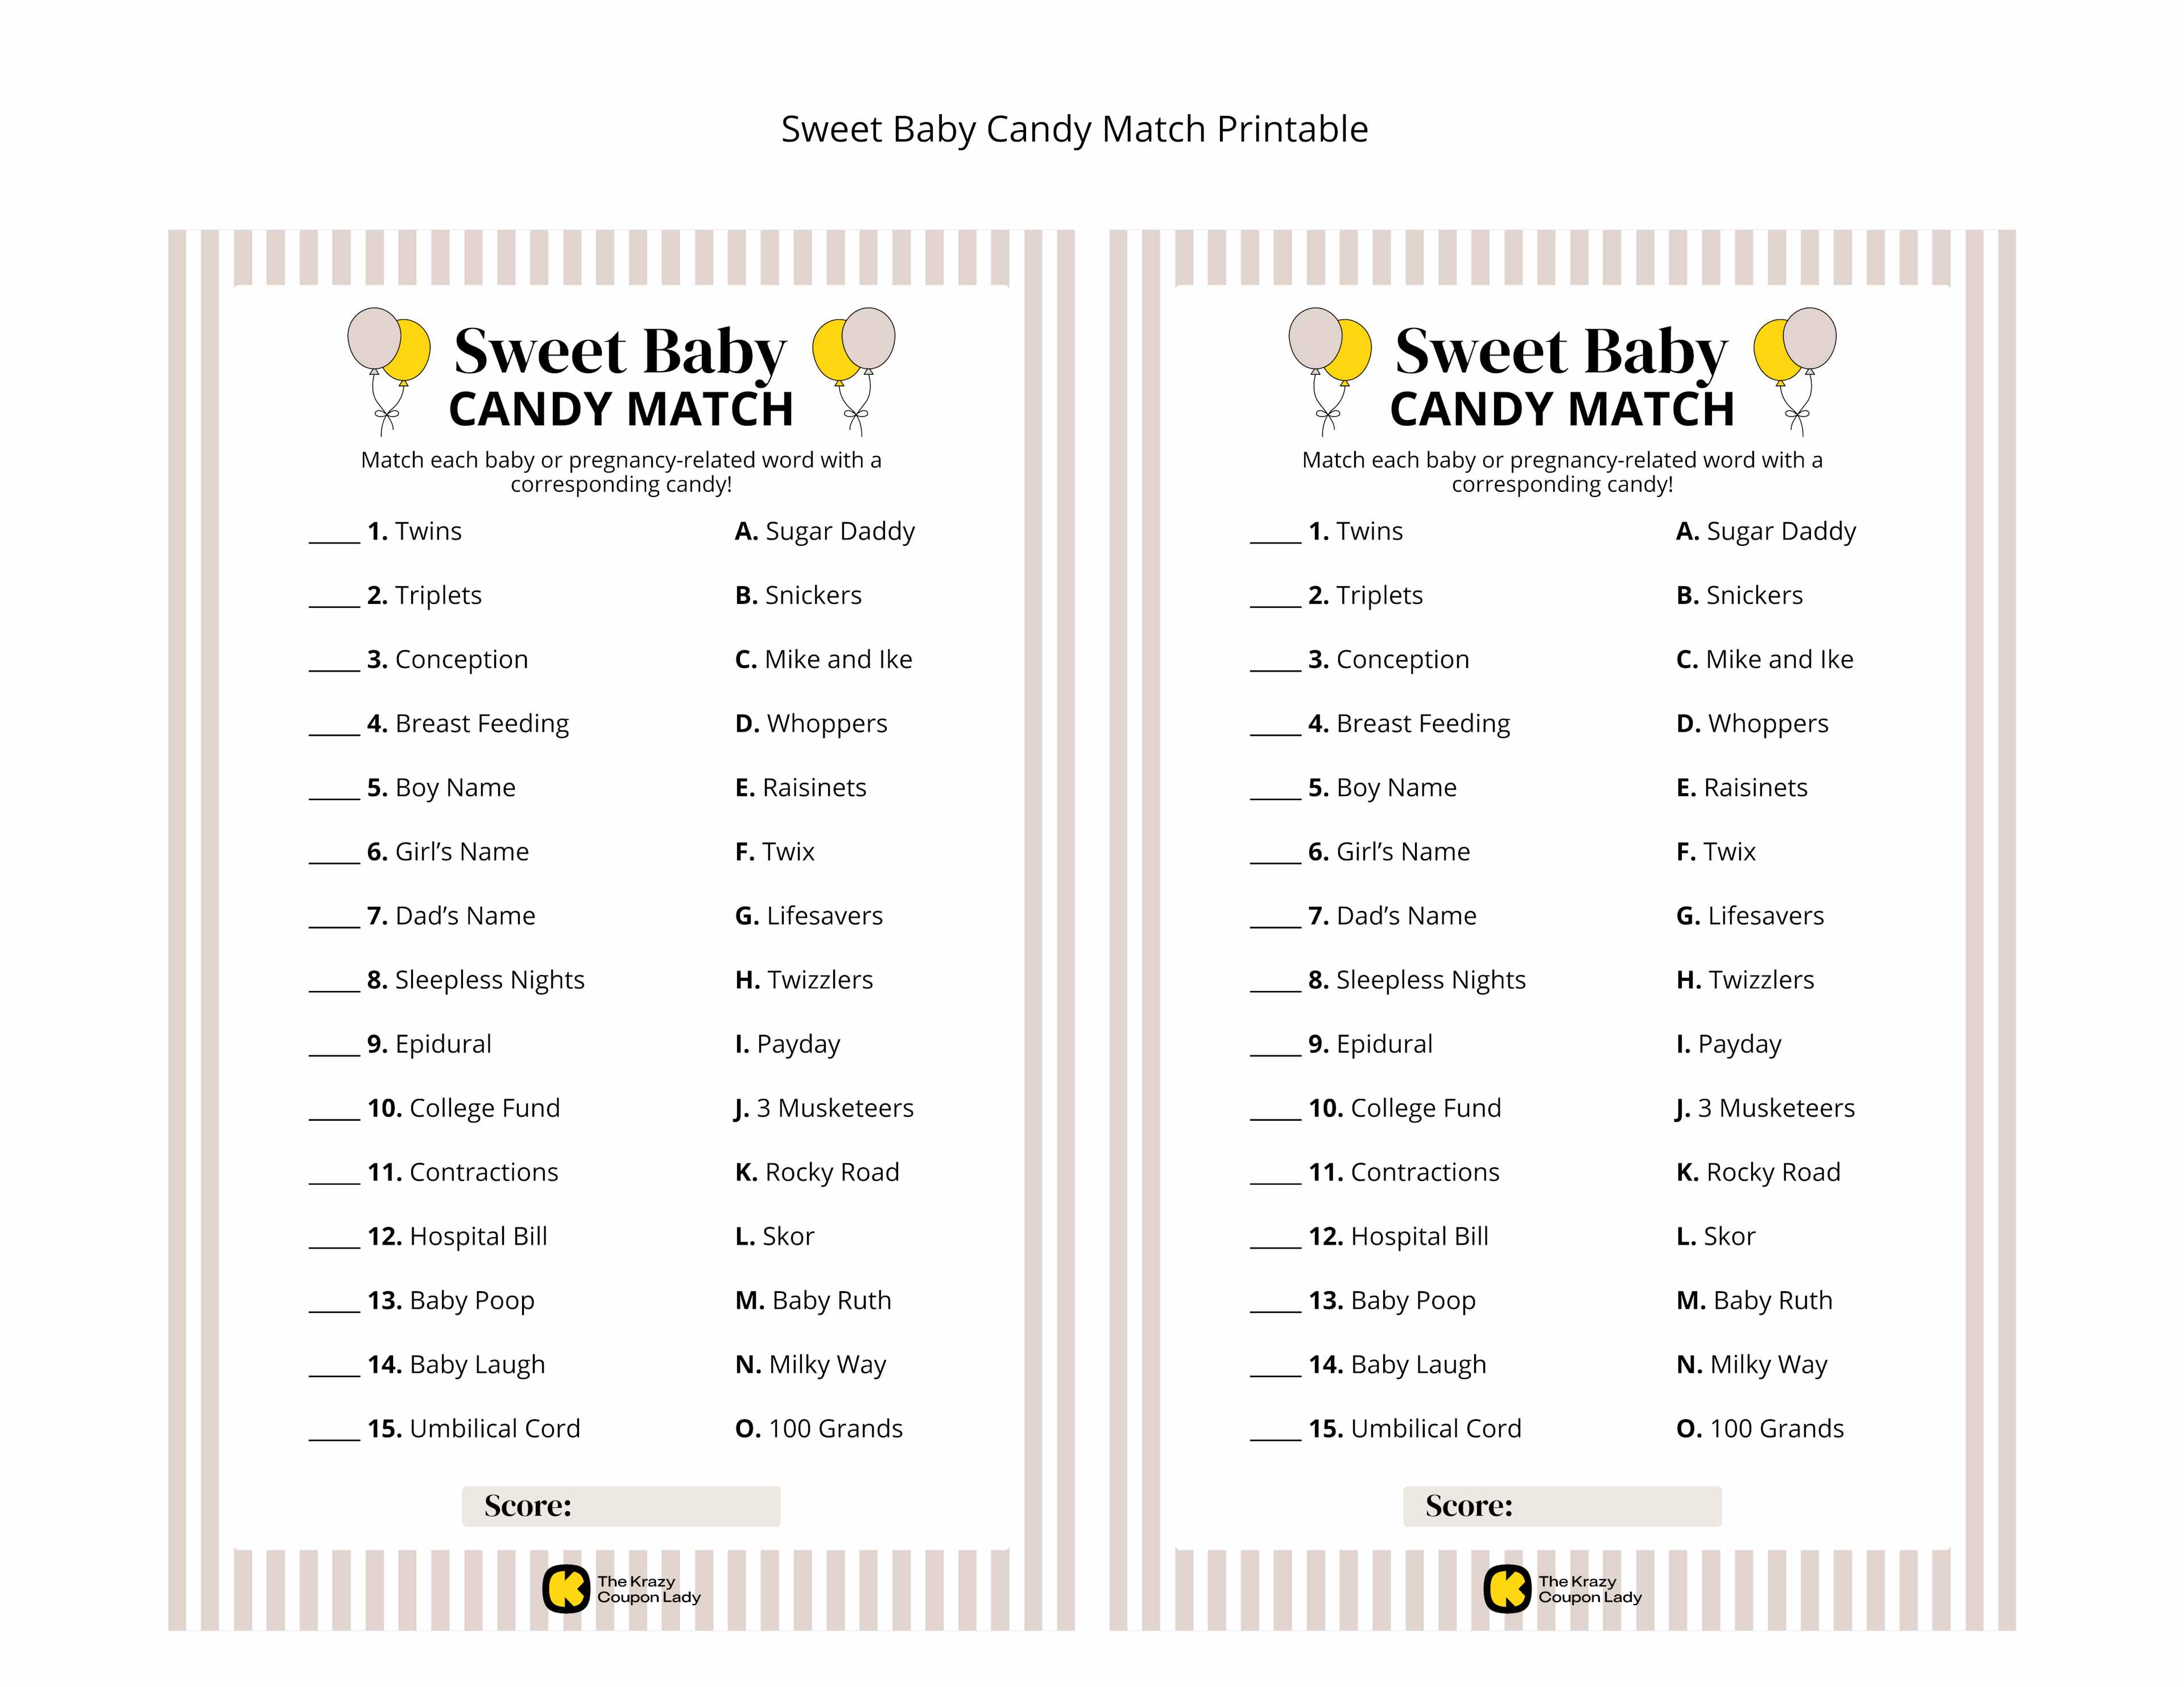 Sweet Baby Candy Match baby shower game